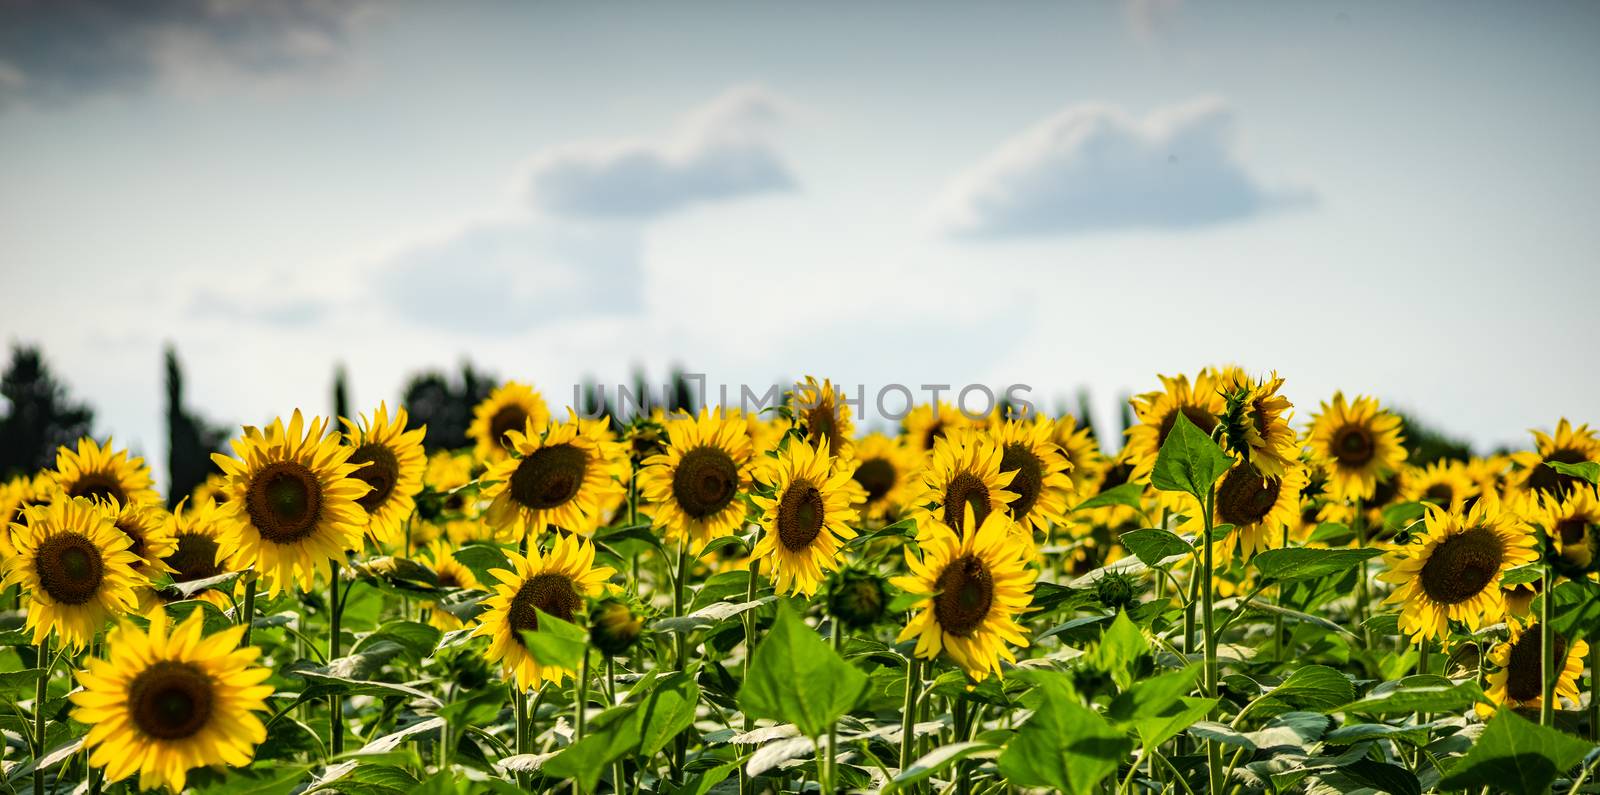 Blooming sunflowers in a field  by Elet